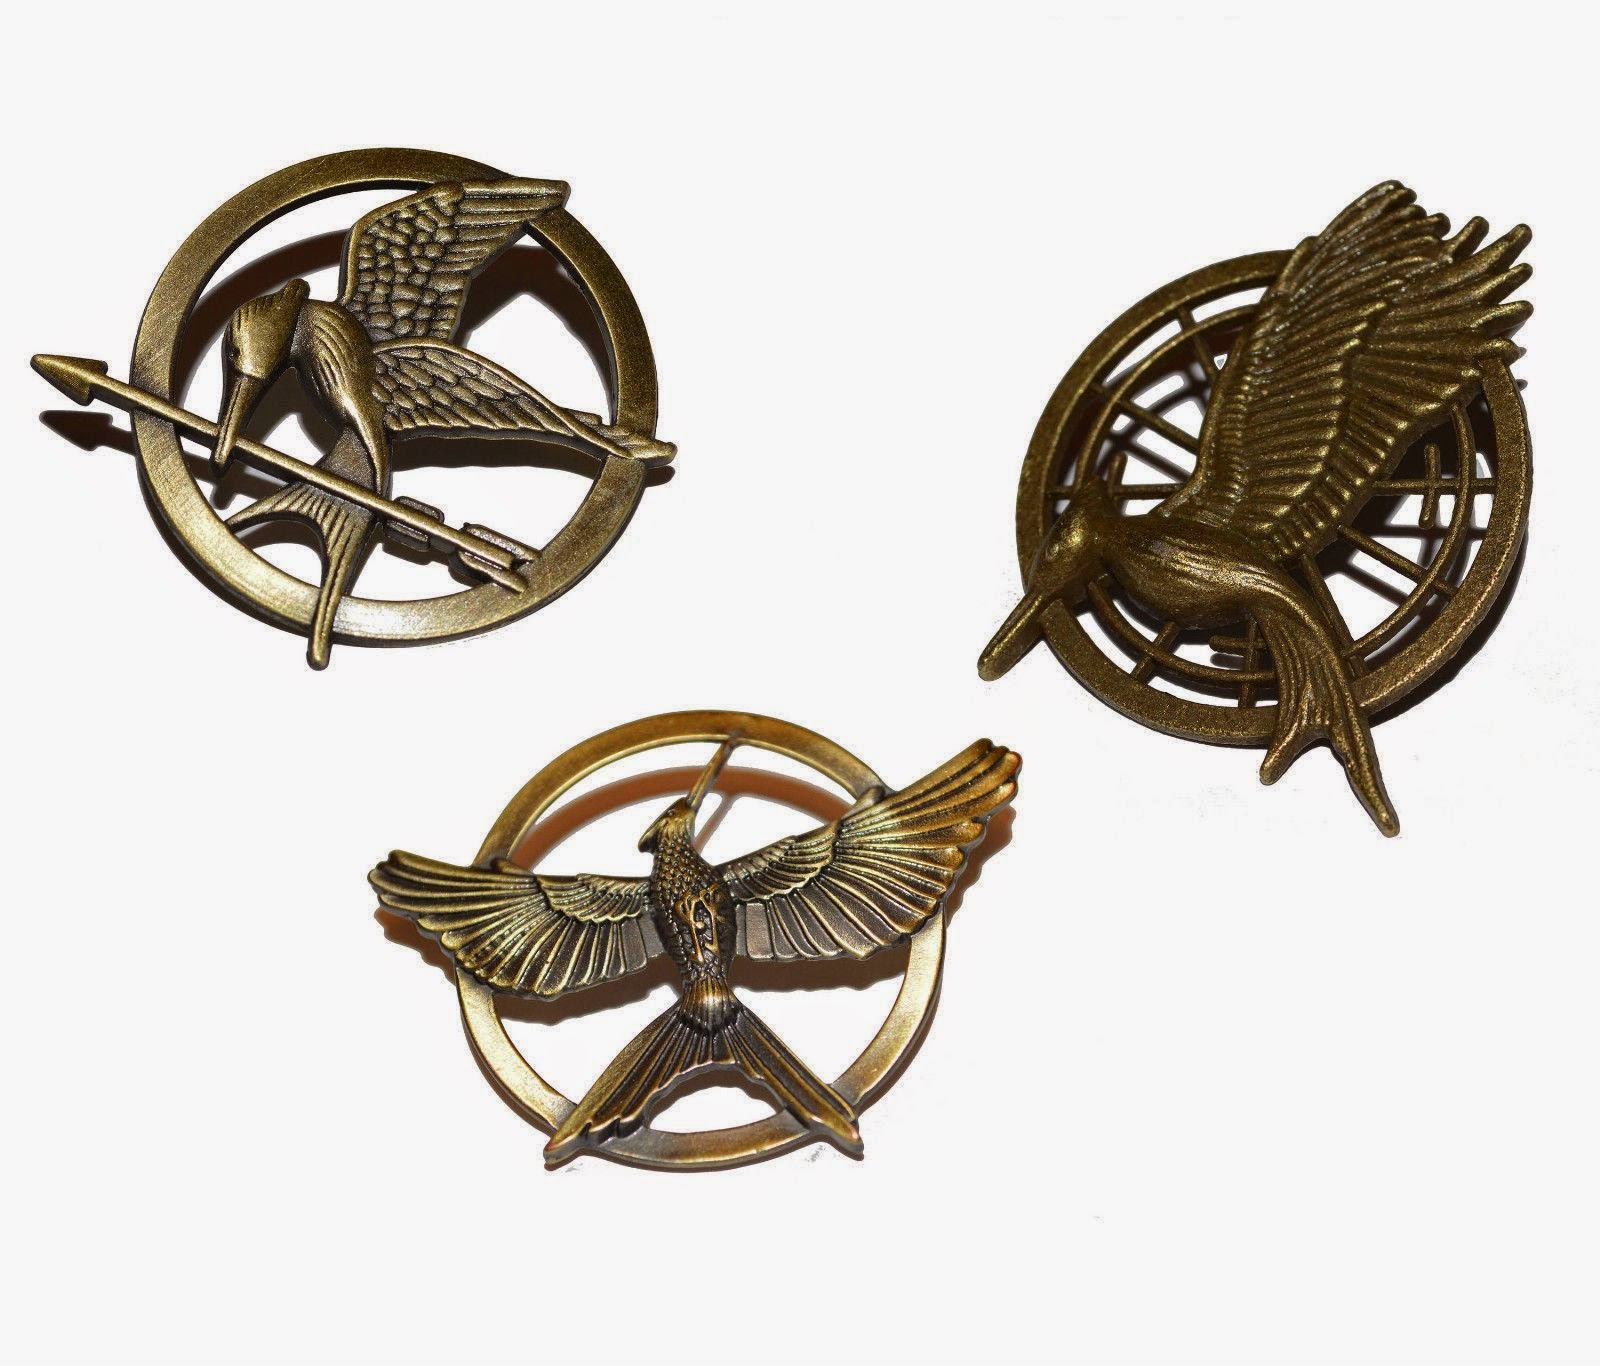 The Hunger Games Mockingjay Part 11 Pc Gift Set W/ Pin, 51% OFF